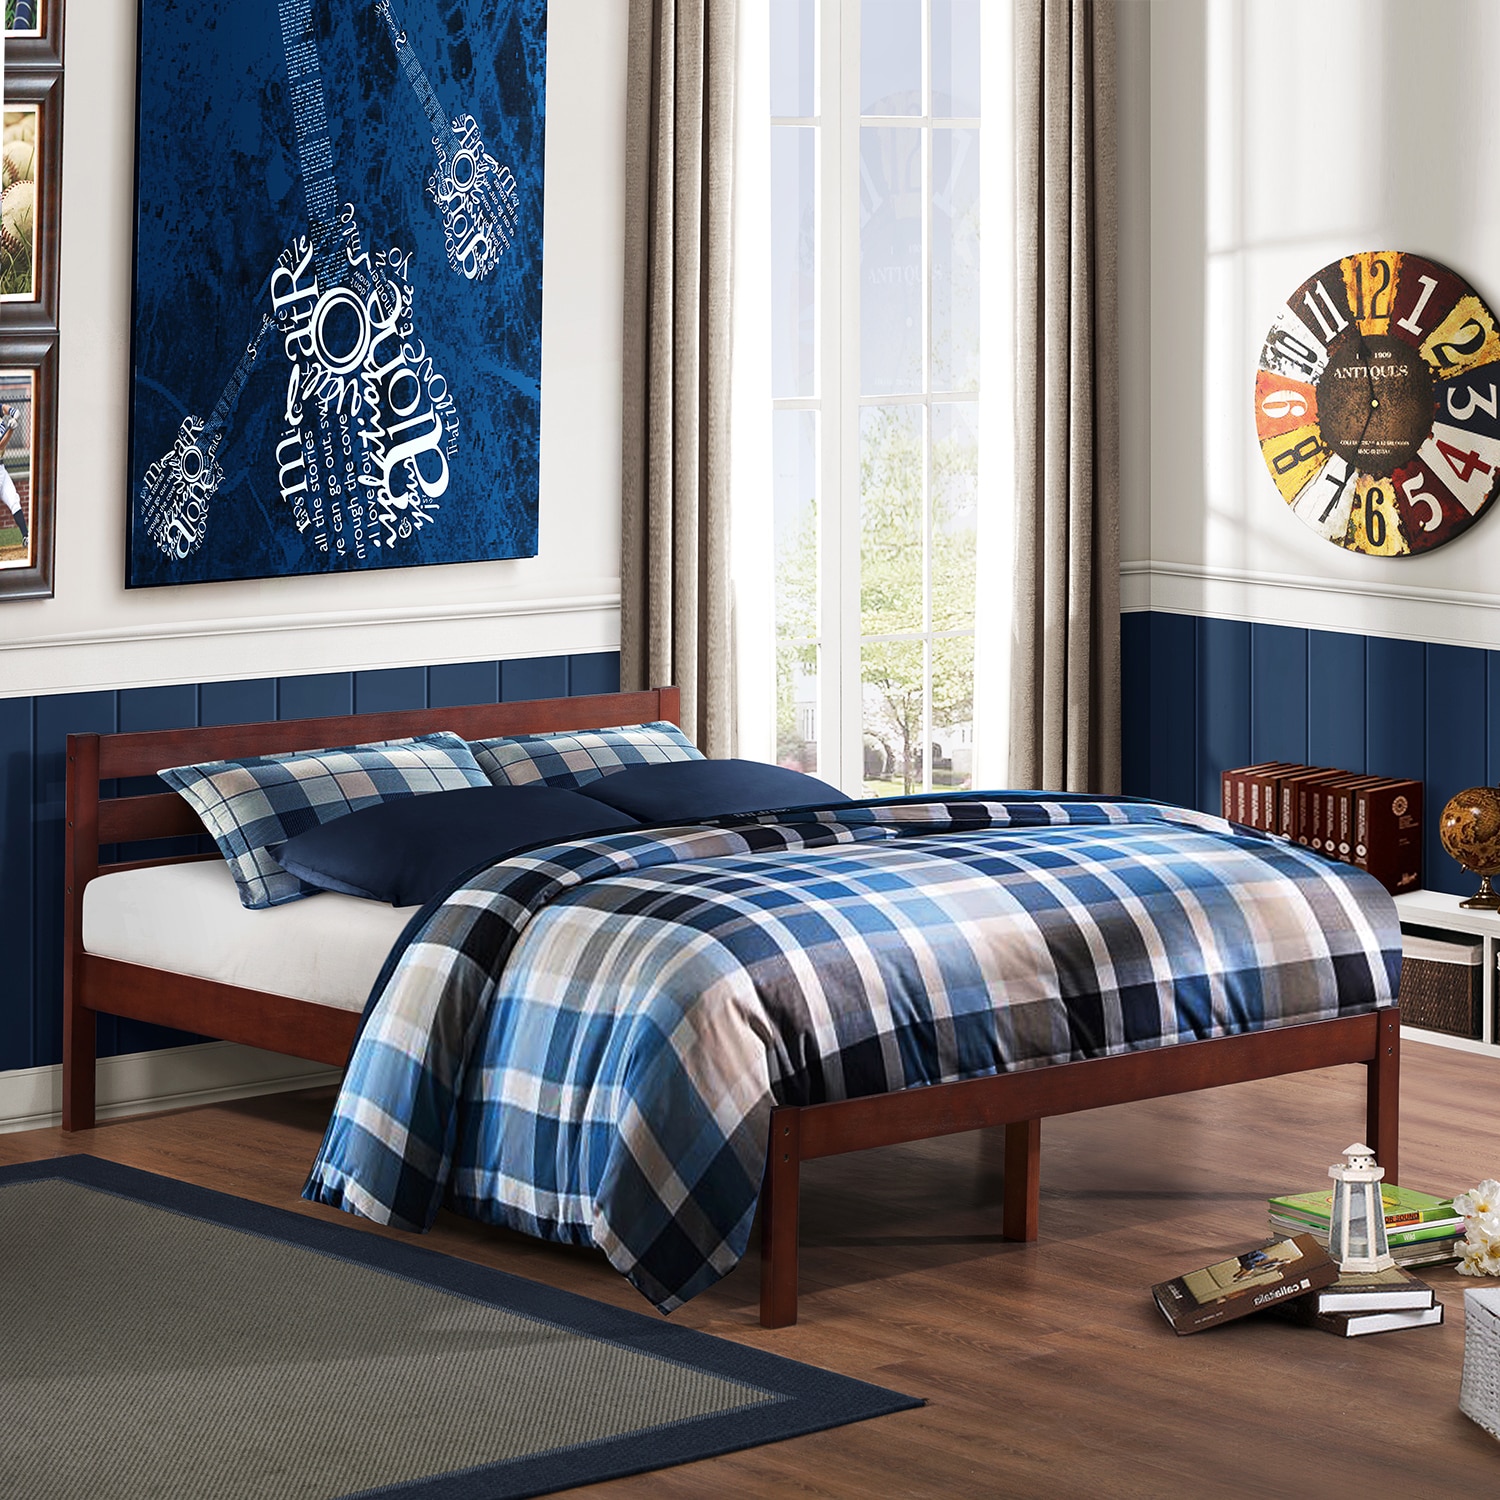 ETHAN HOME Haylyn Queen Cappuccino Platform Bed Today $198.99 1.0 (1